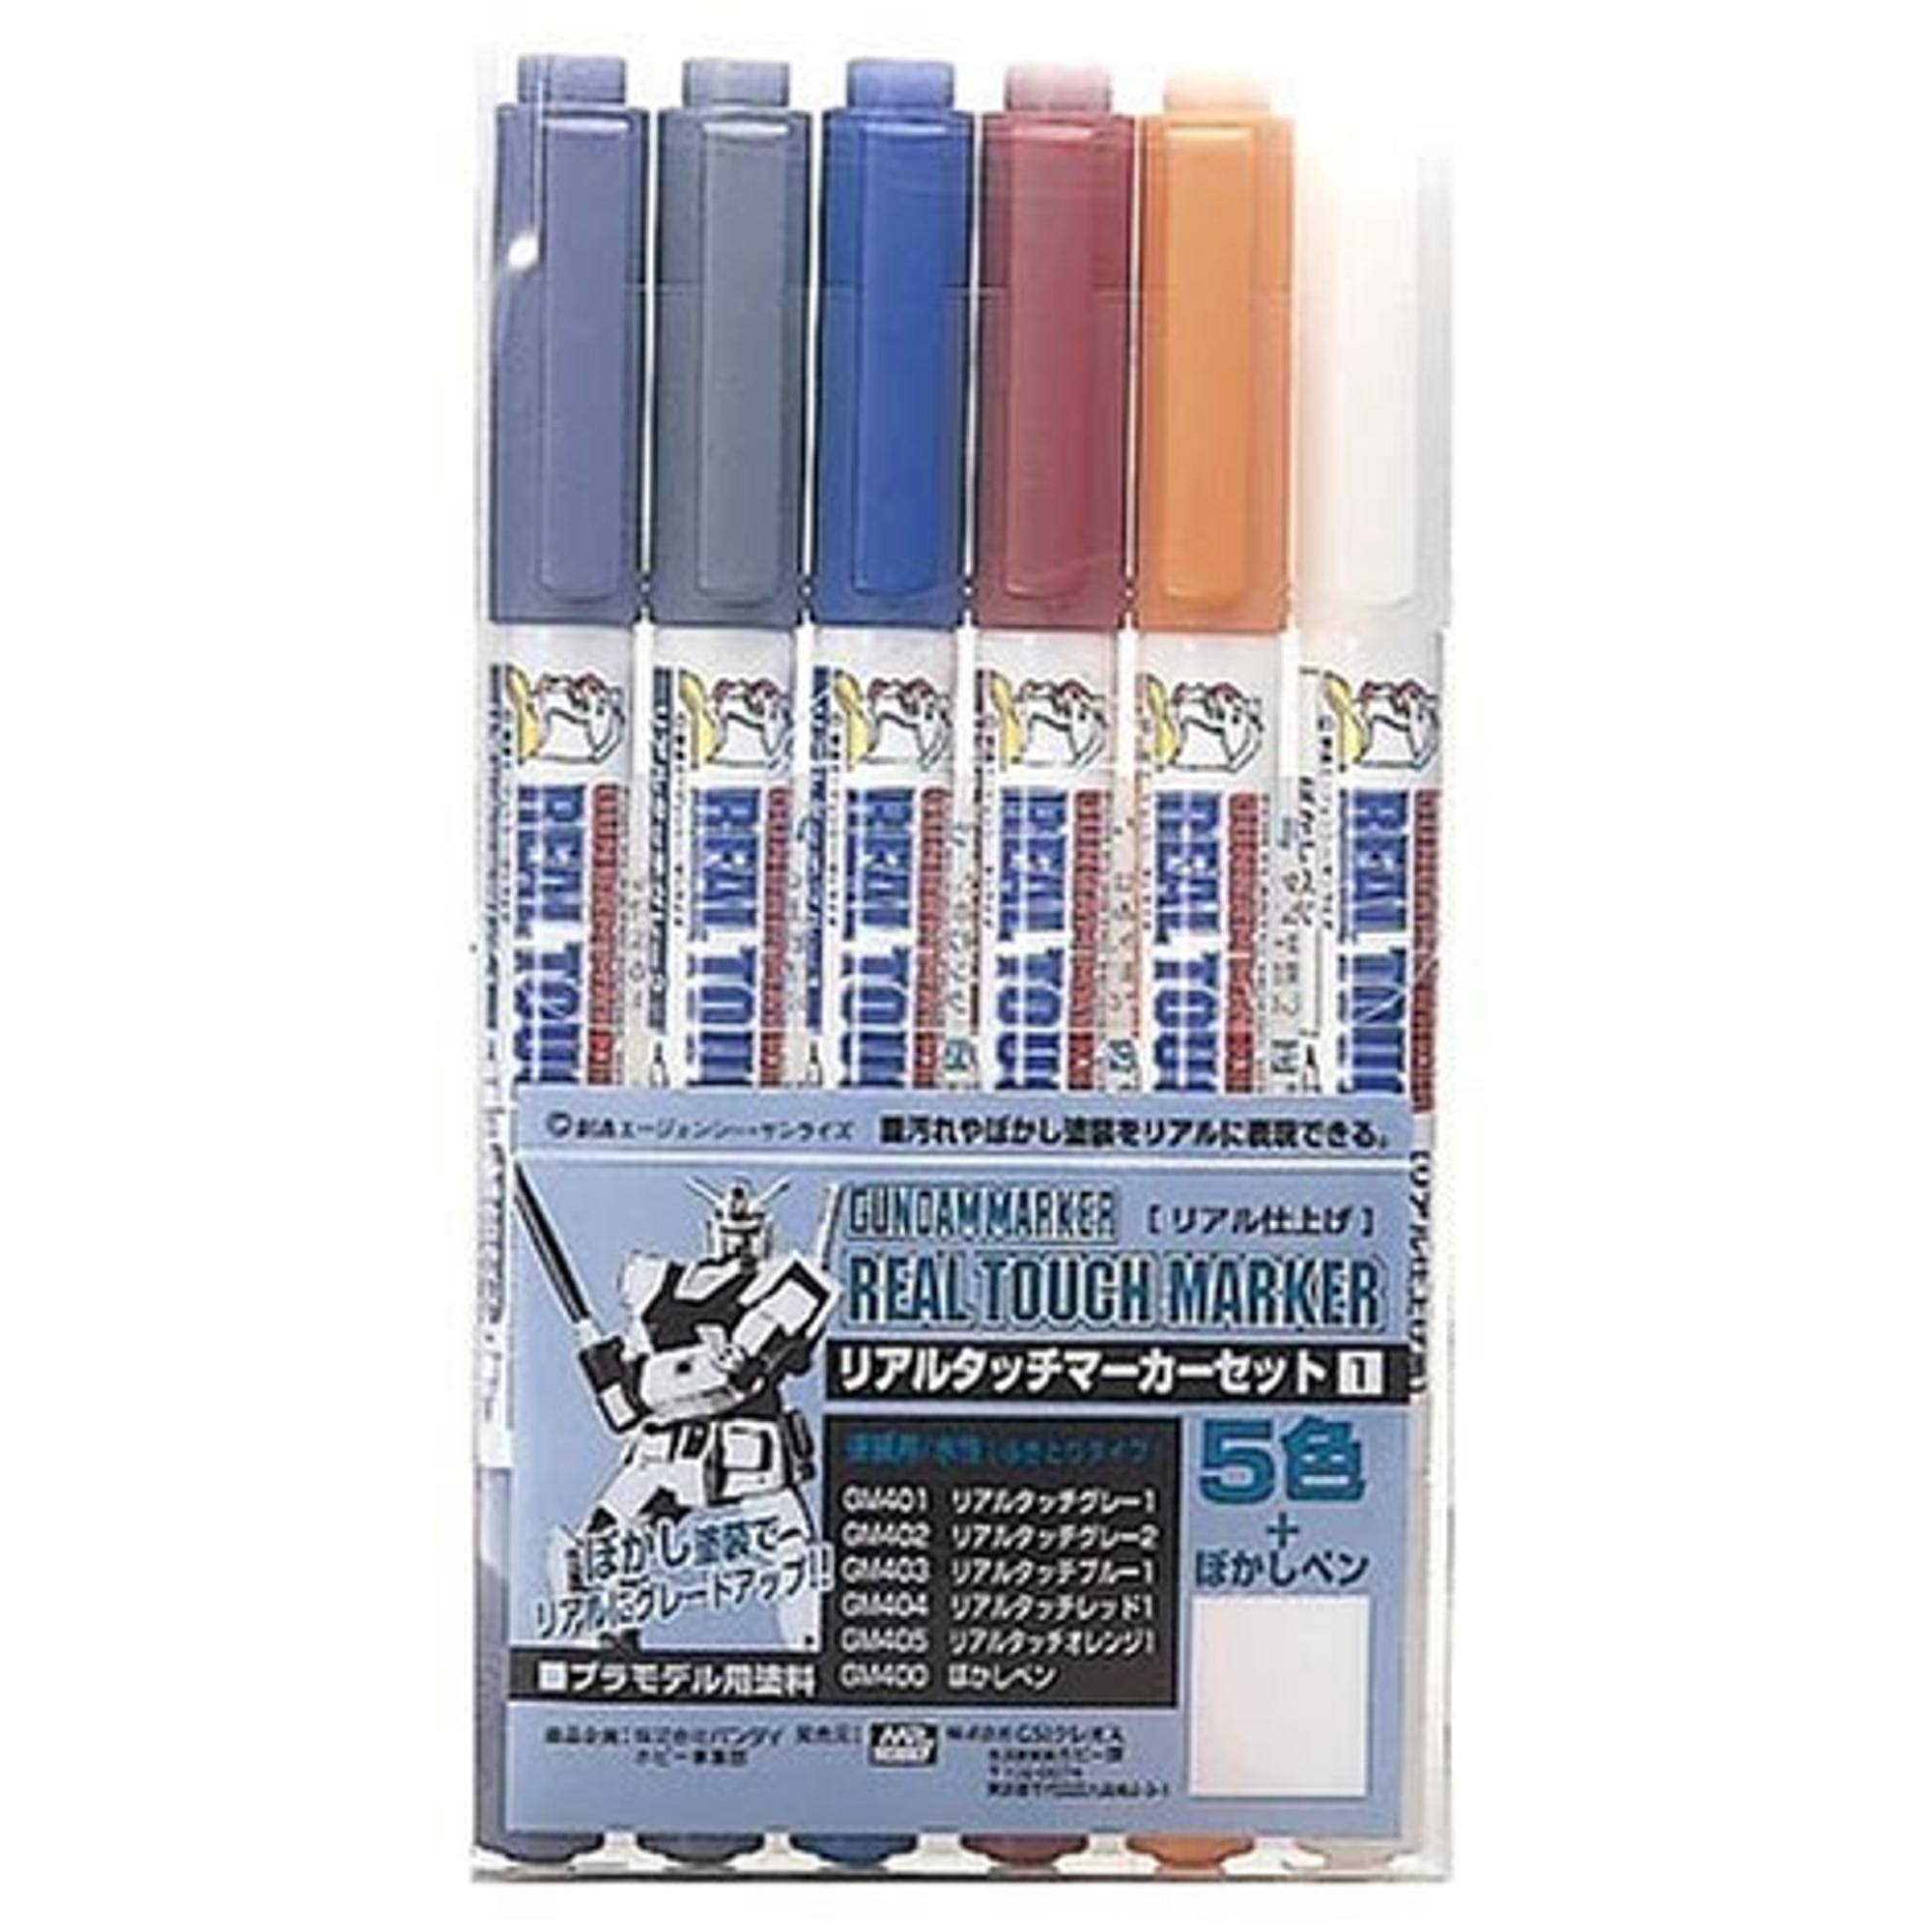 GSI Creos Gundam Marker Real Touch Set - 6 Markers